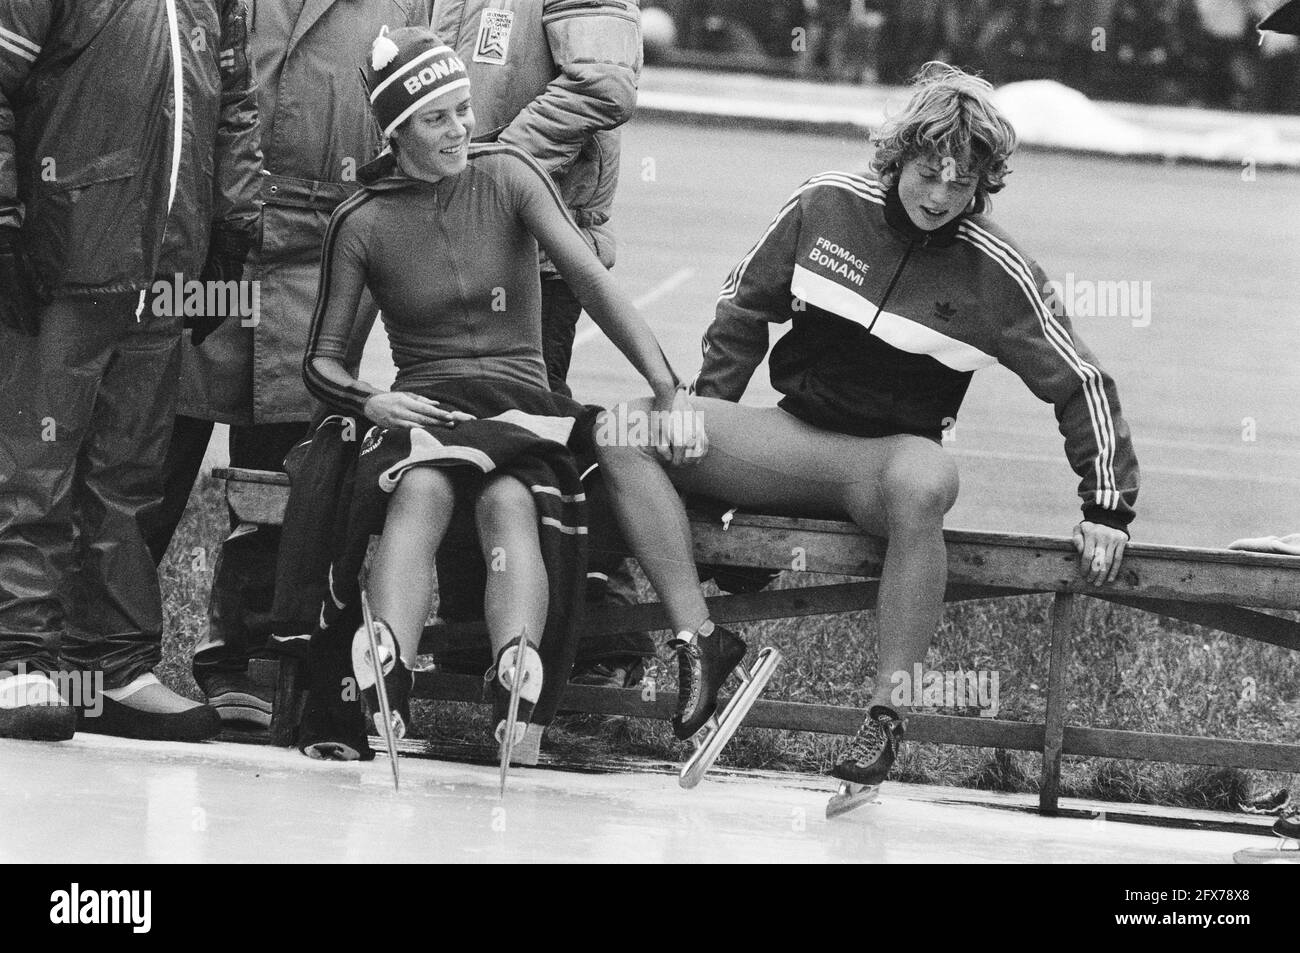 Ina Steenbruggen (l) and Ria Visser after finishing the 5 km sitting on a bench, January 9, 1983, skating, skating competitions, sports, The Netherlands, 20th century press agency photo, news to remember, documentary, historic photography 1945-1990, visual stories, human history of the Twentieth Century, capturing moments in time Stock Photo